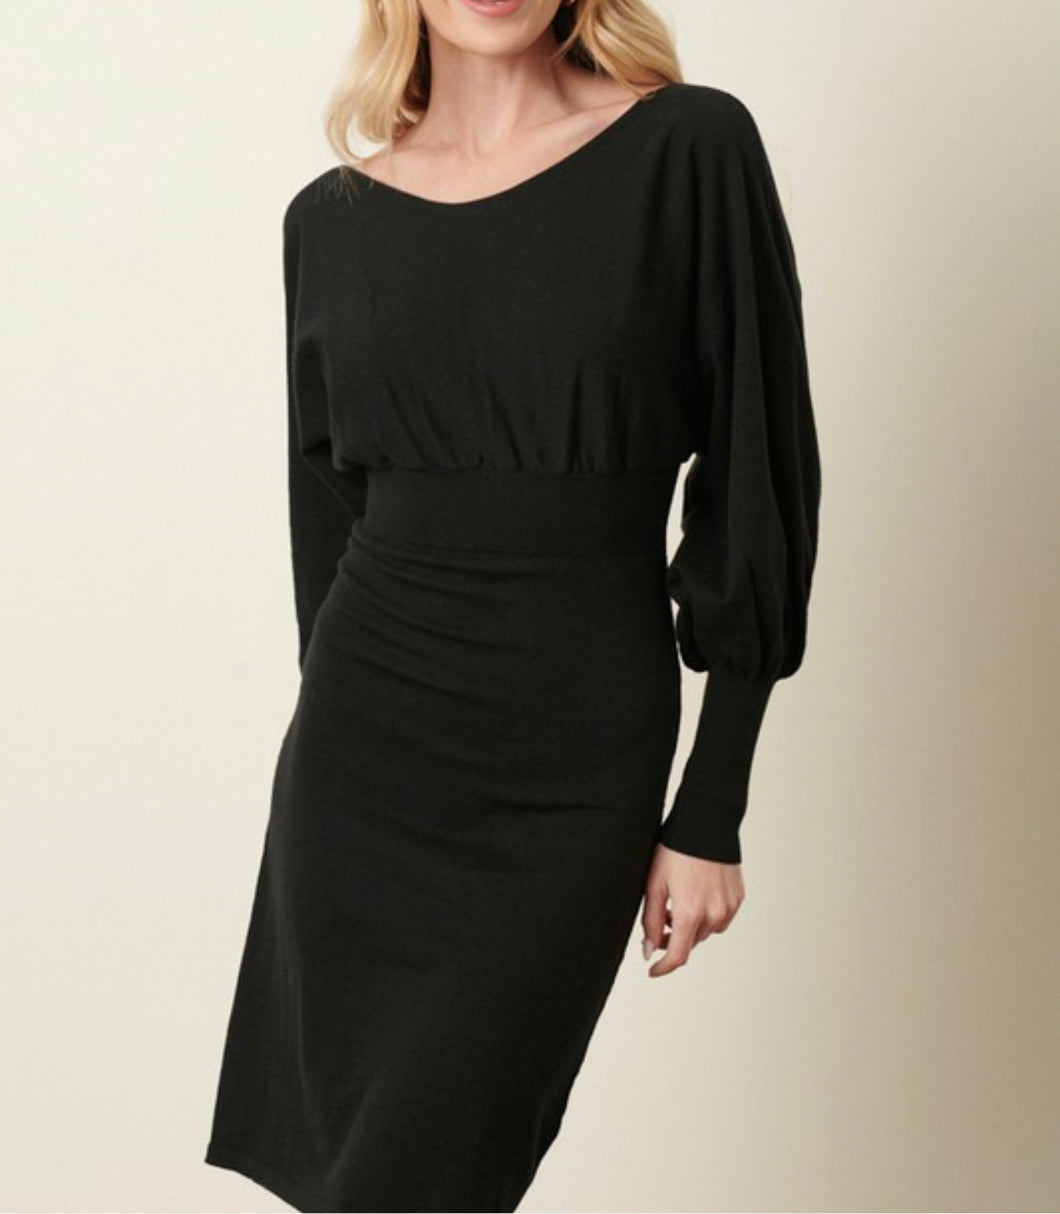 Black Sweater Dress with Boatneck and Dolman Balloon Sleeves